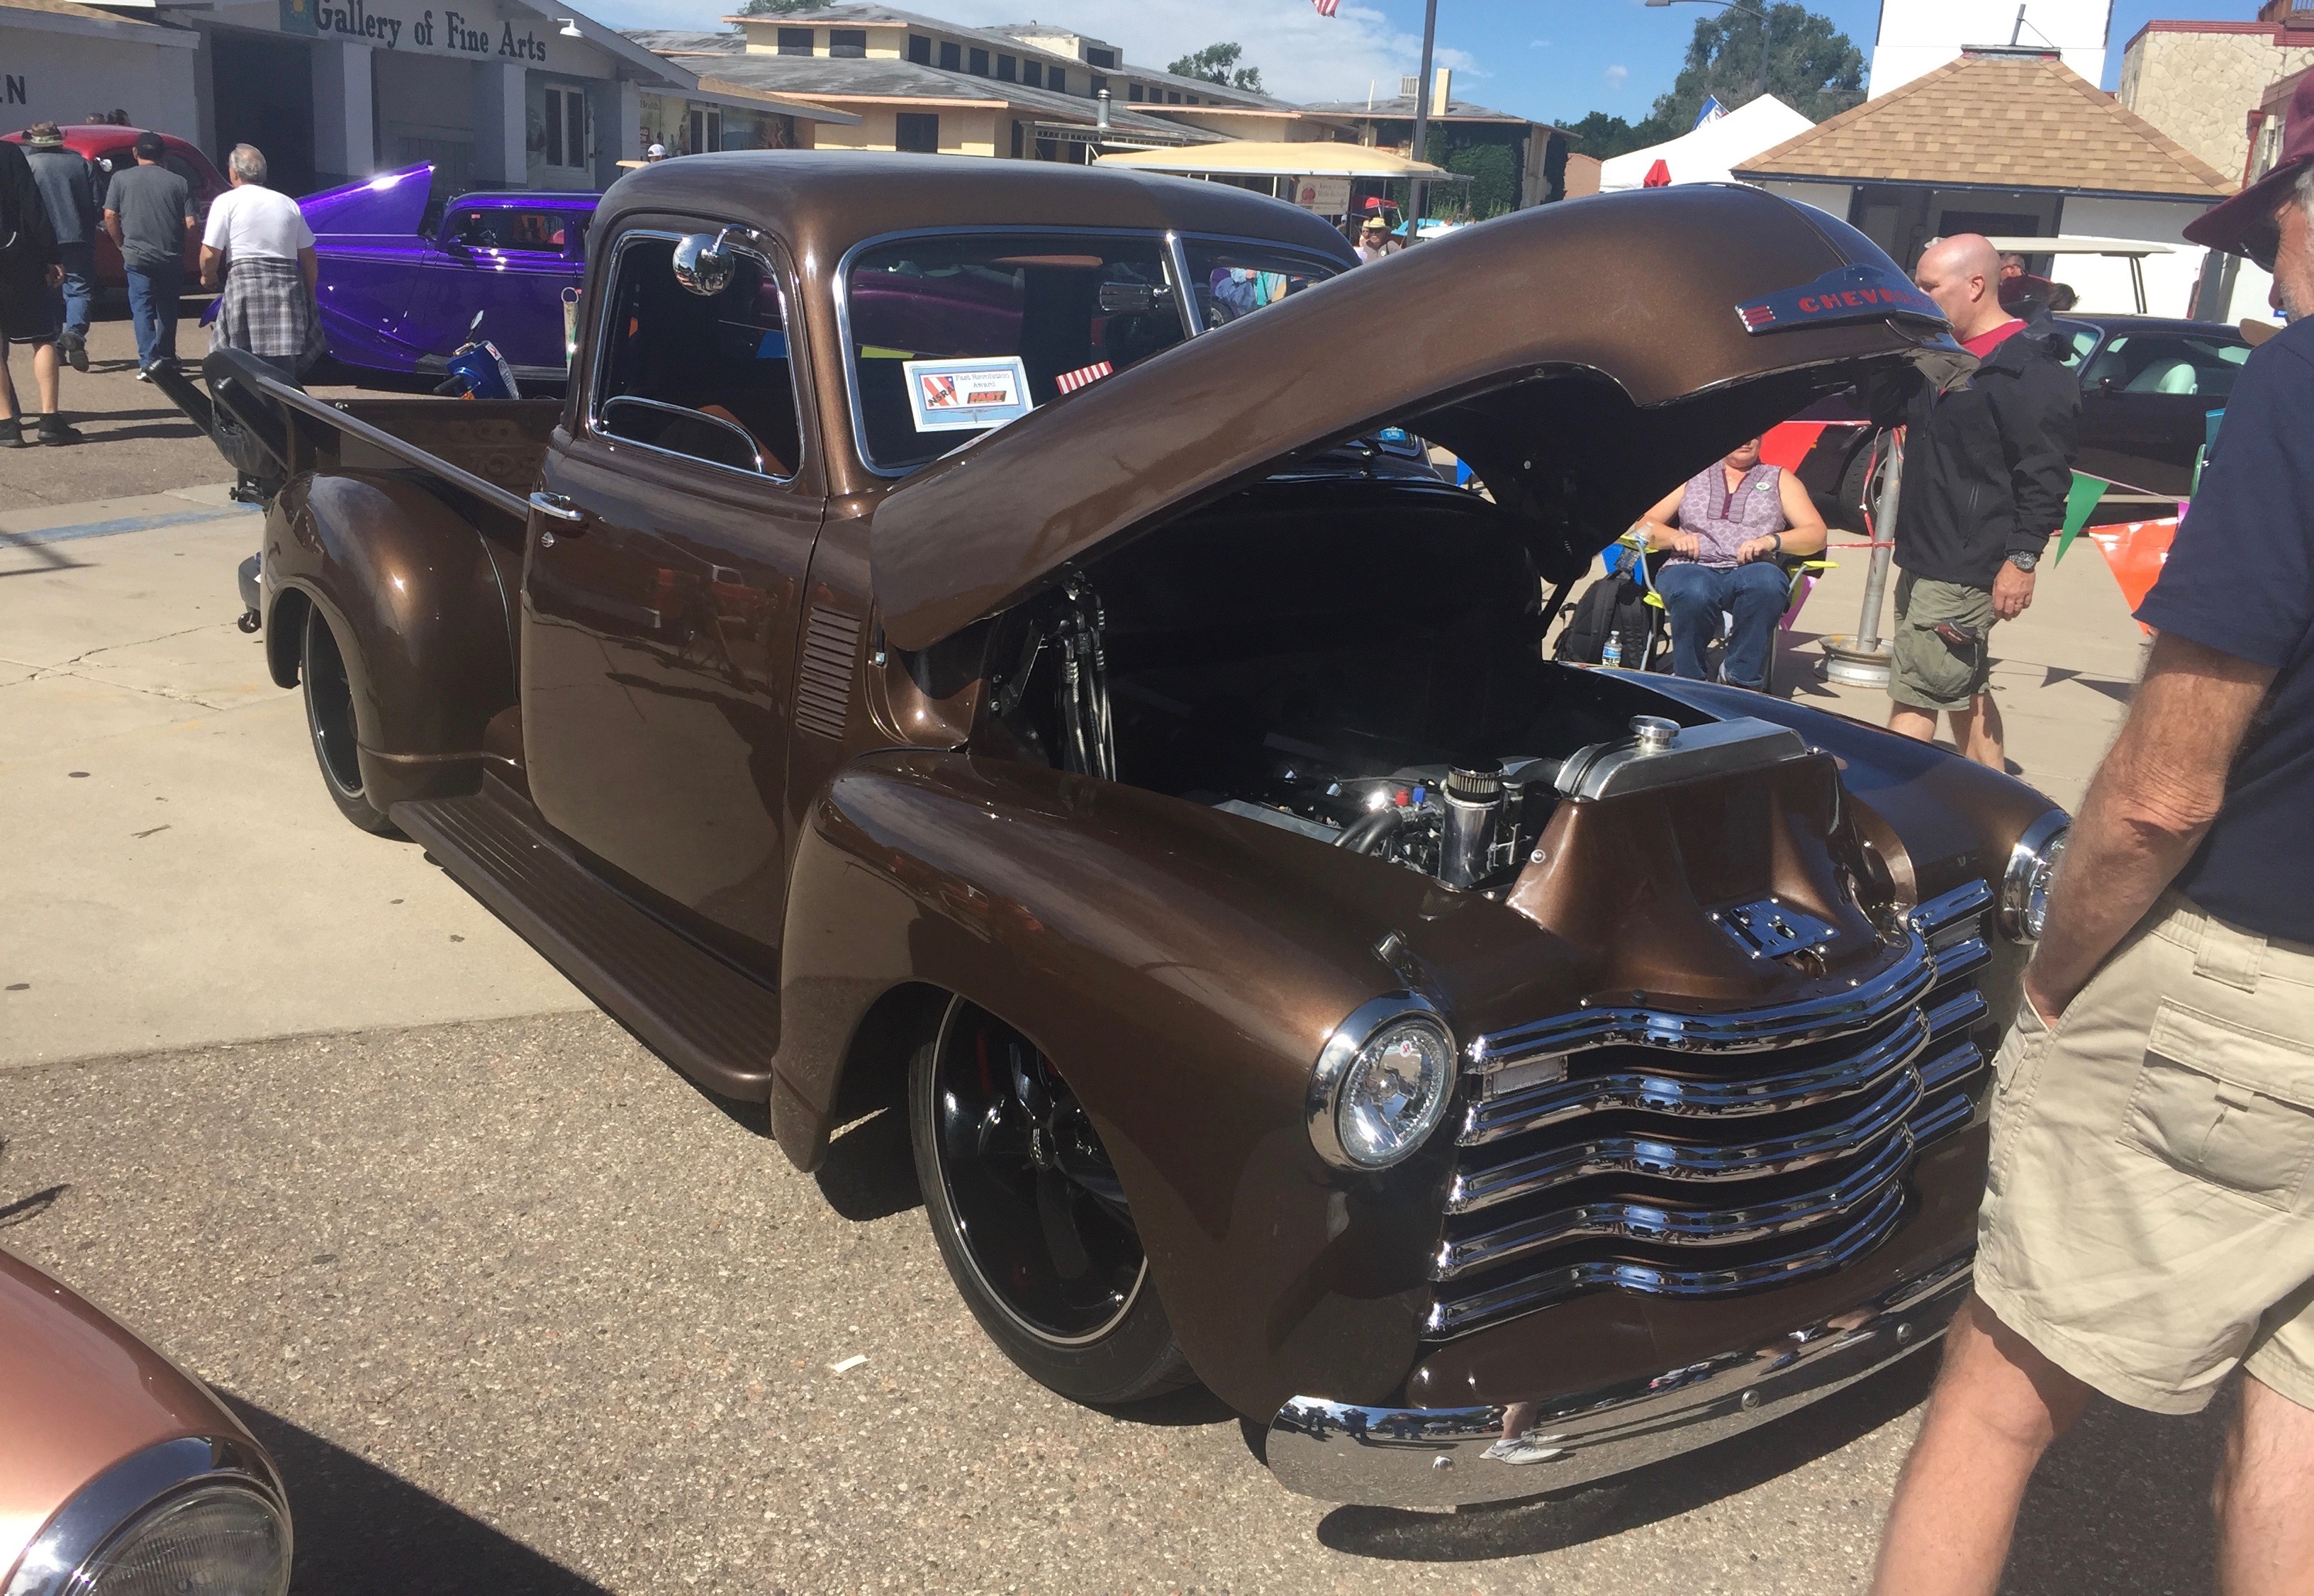 NSRA, NSRA proclaims winners at Rocky Mountain Nationals, ClassicCars.com Journal